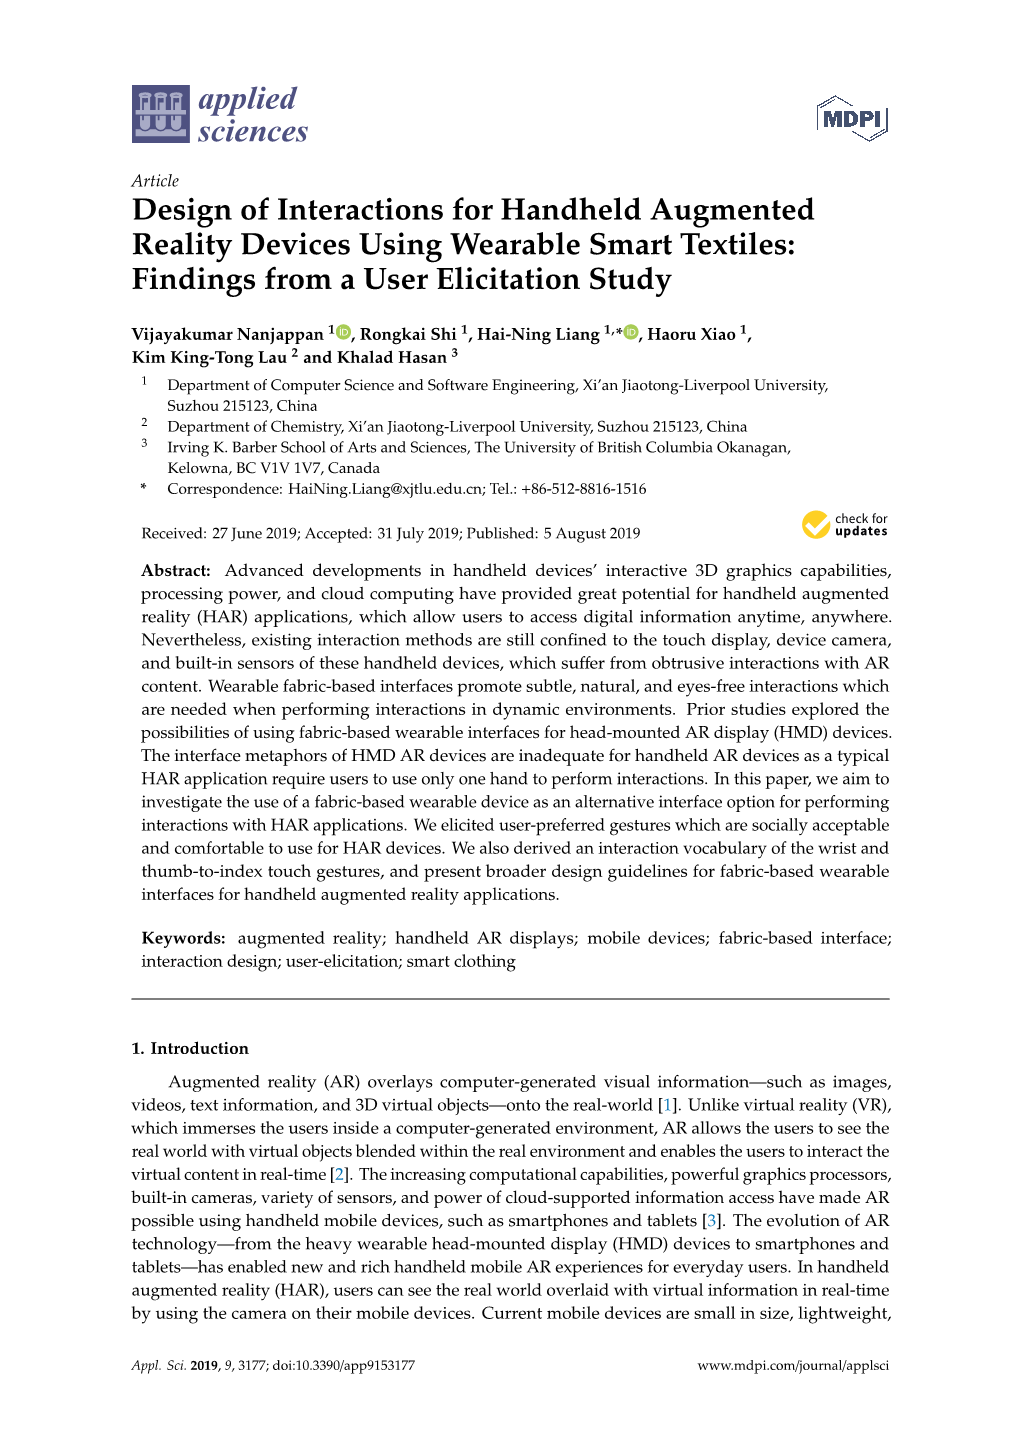 Design of Interactions for Handheld Augmented Reality Devices Using Wearable Smart Textiles: Findings from a User Elicitation Study